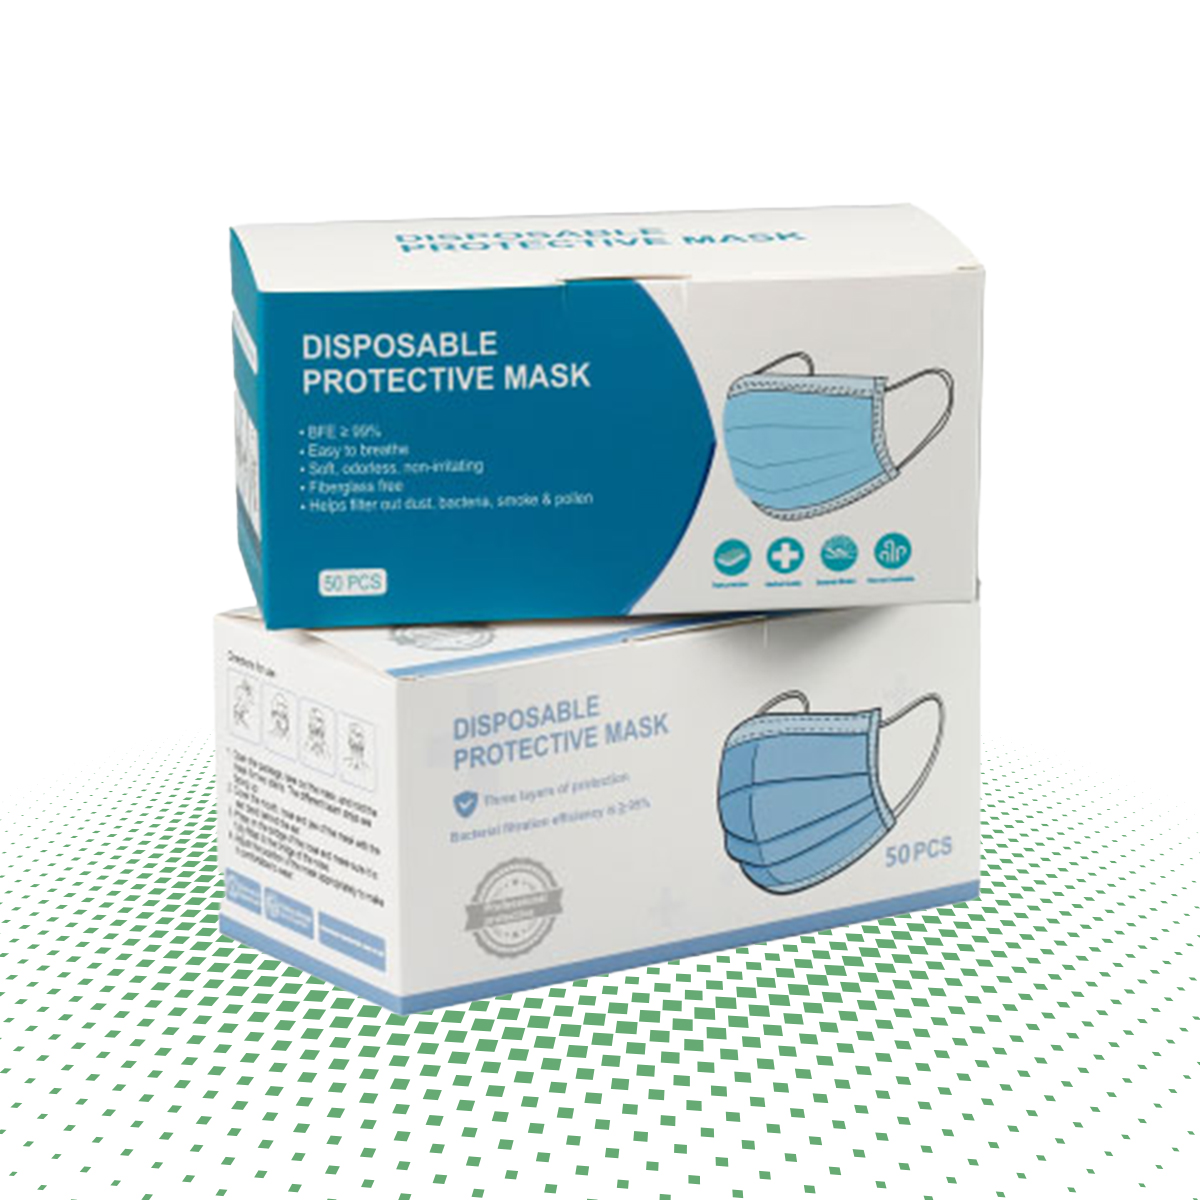 Get Custom Health Care Mask Boxes at Wholesale Prices - Texas - Arlington ID1536025